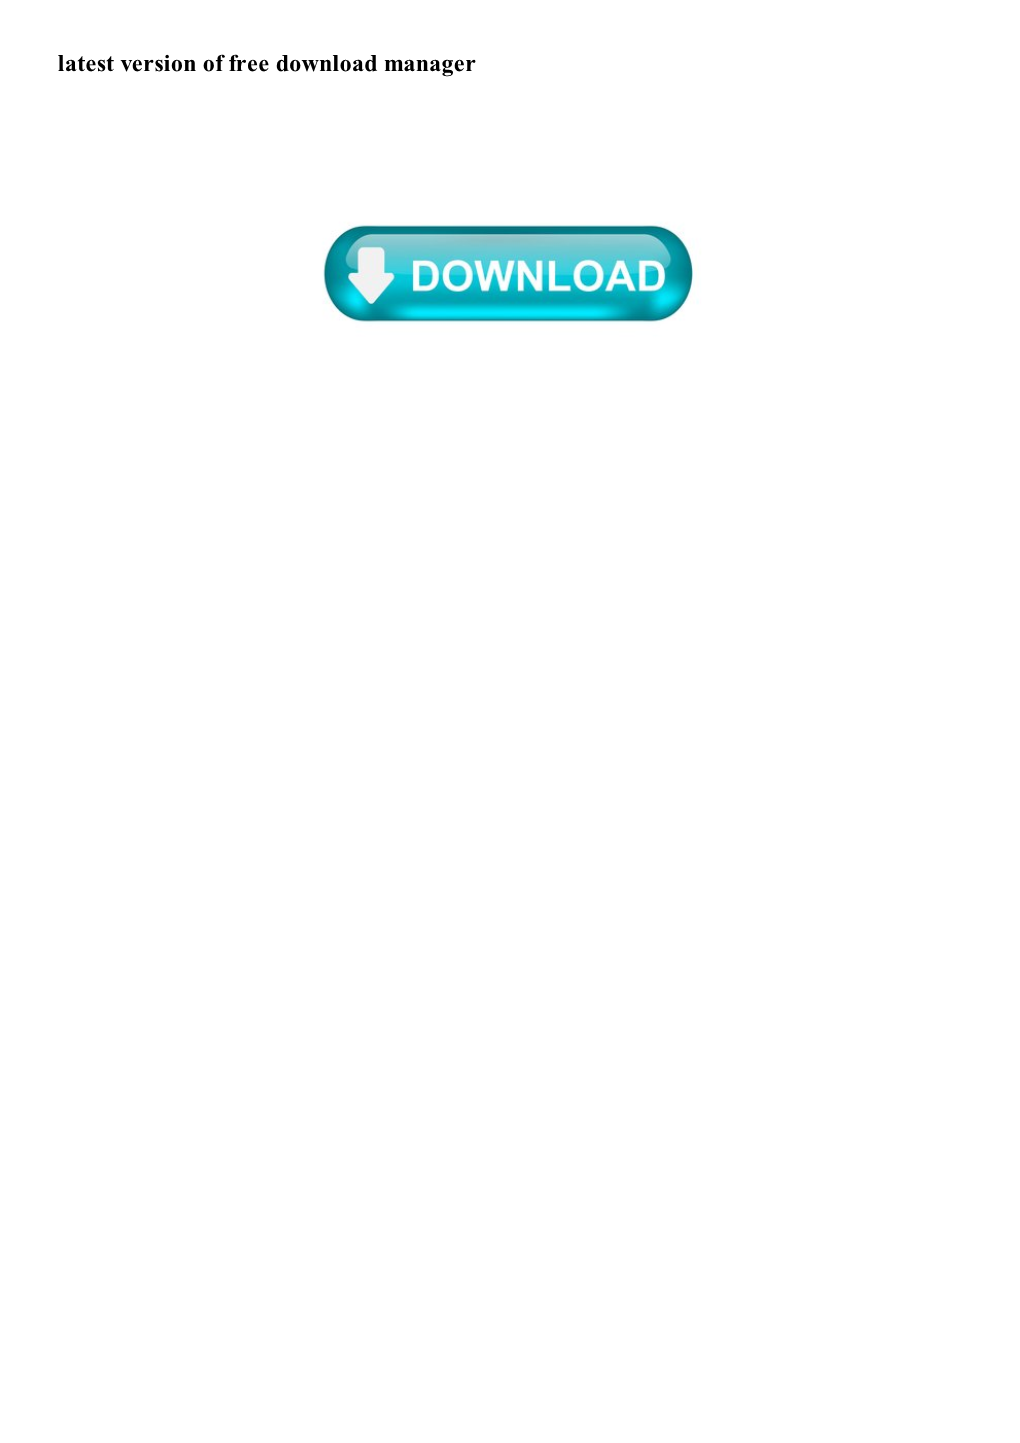 Latest Version of Free Download Manager Download Free Download Manager for PC